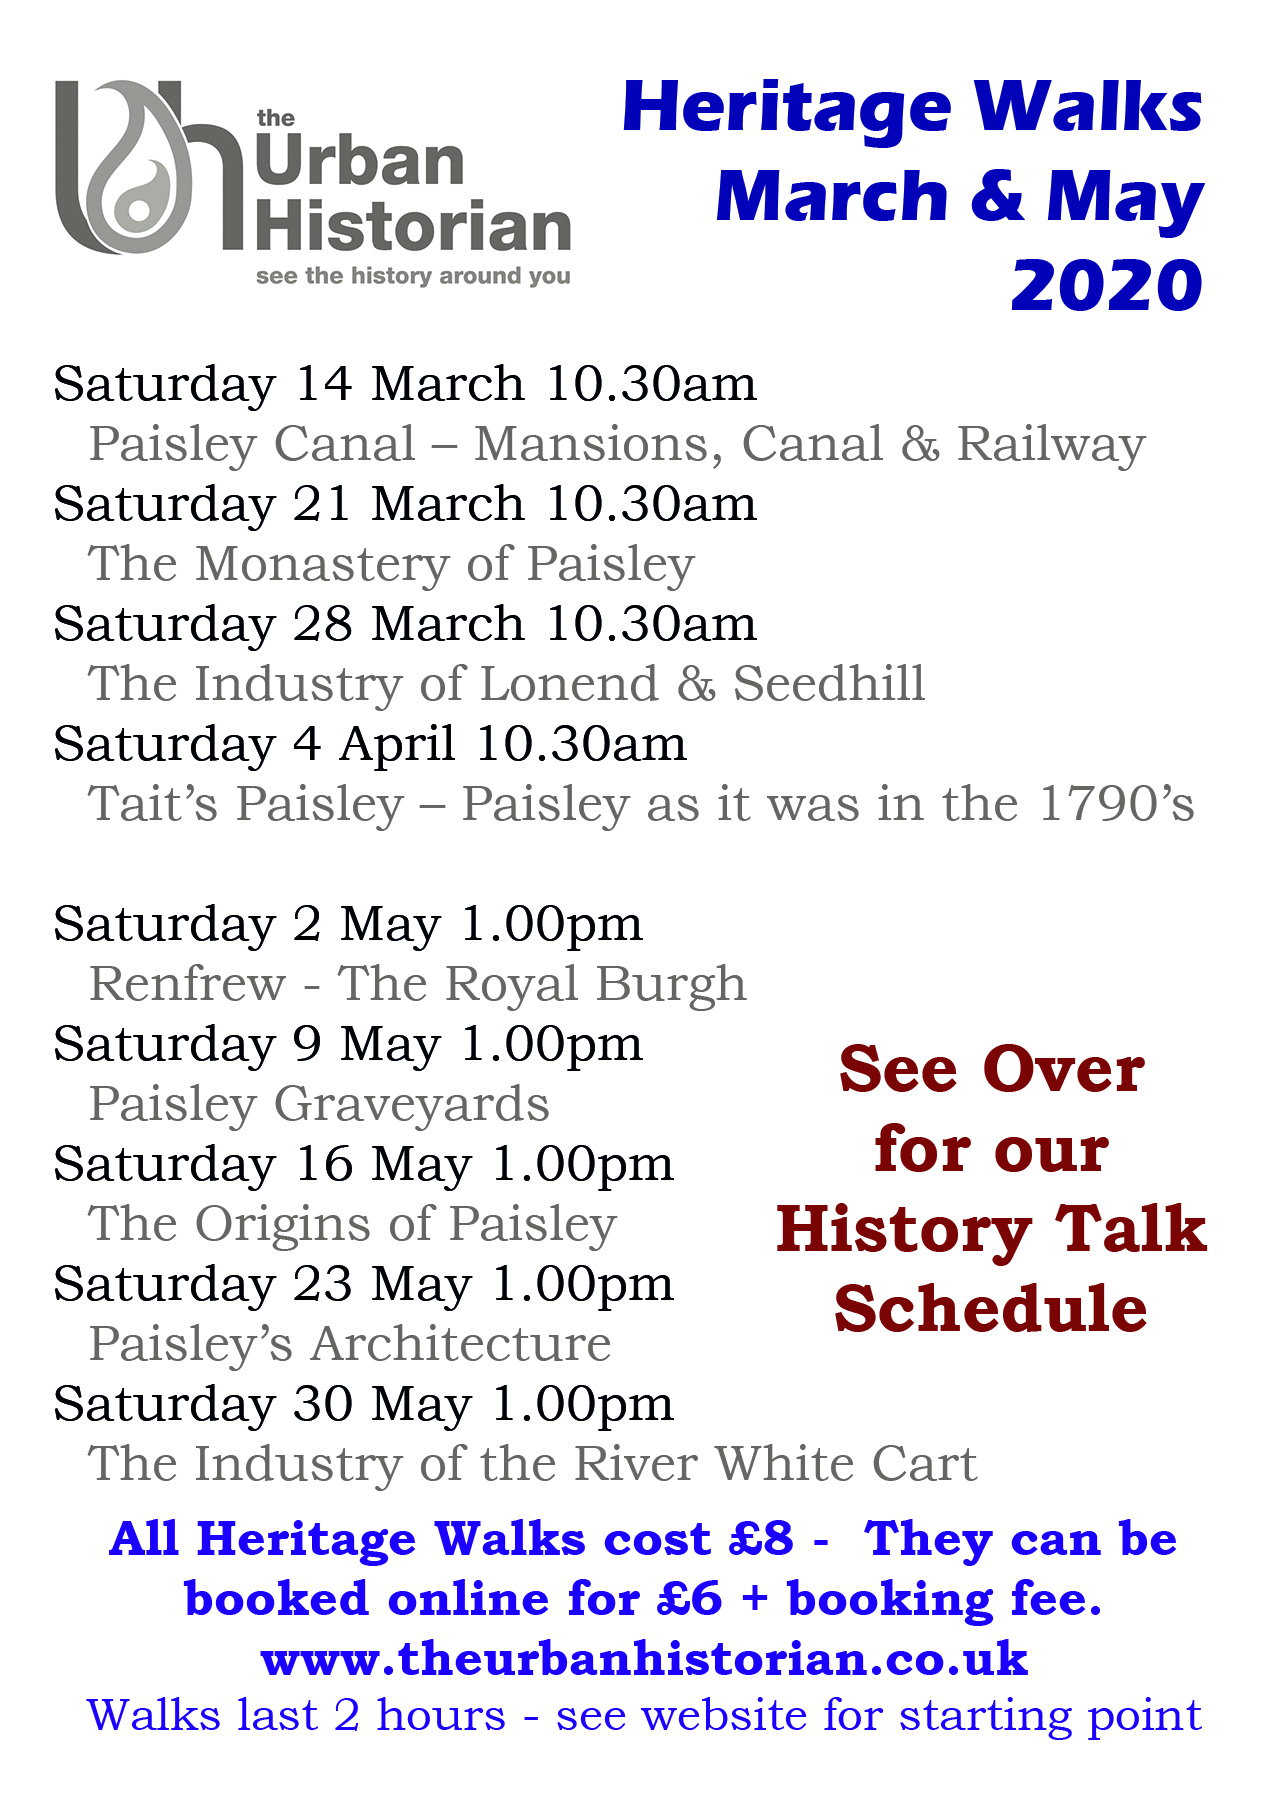 Heritage Walks March to May 2020